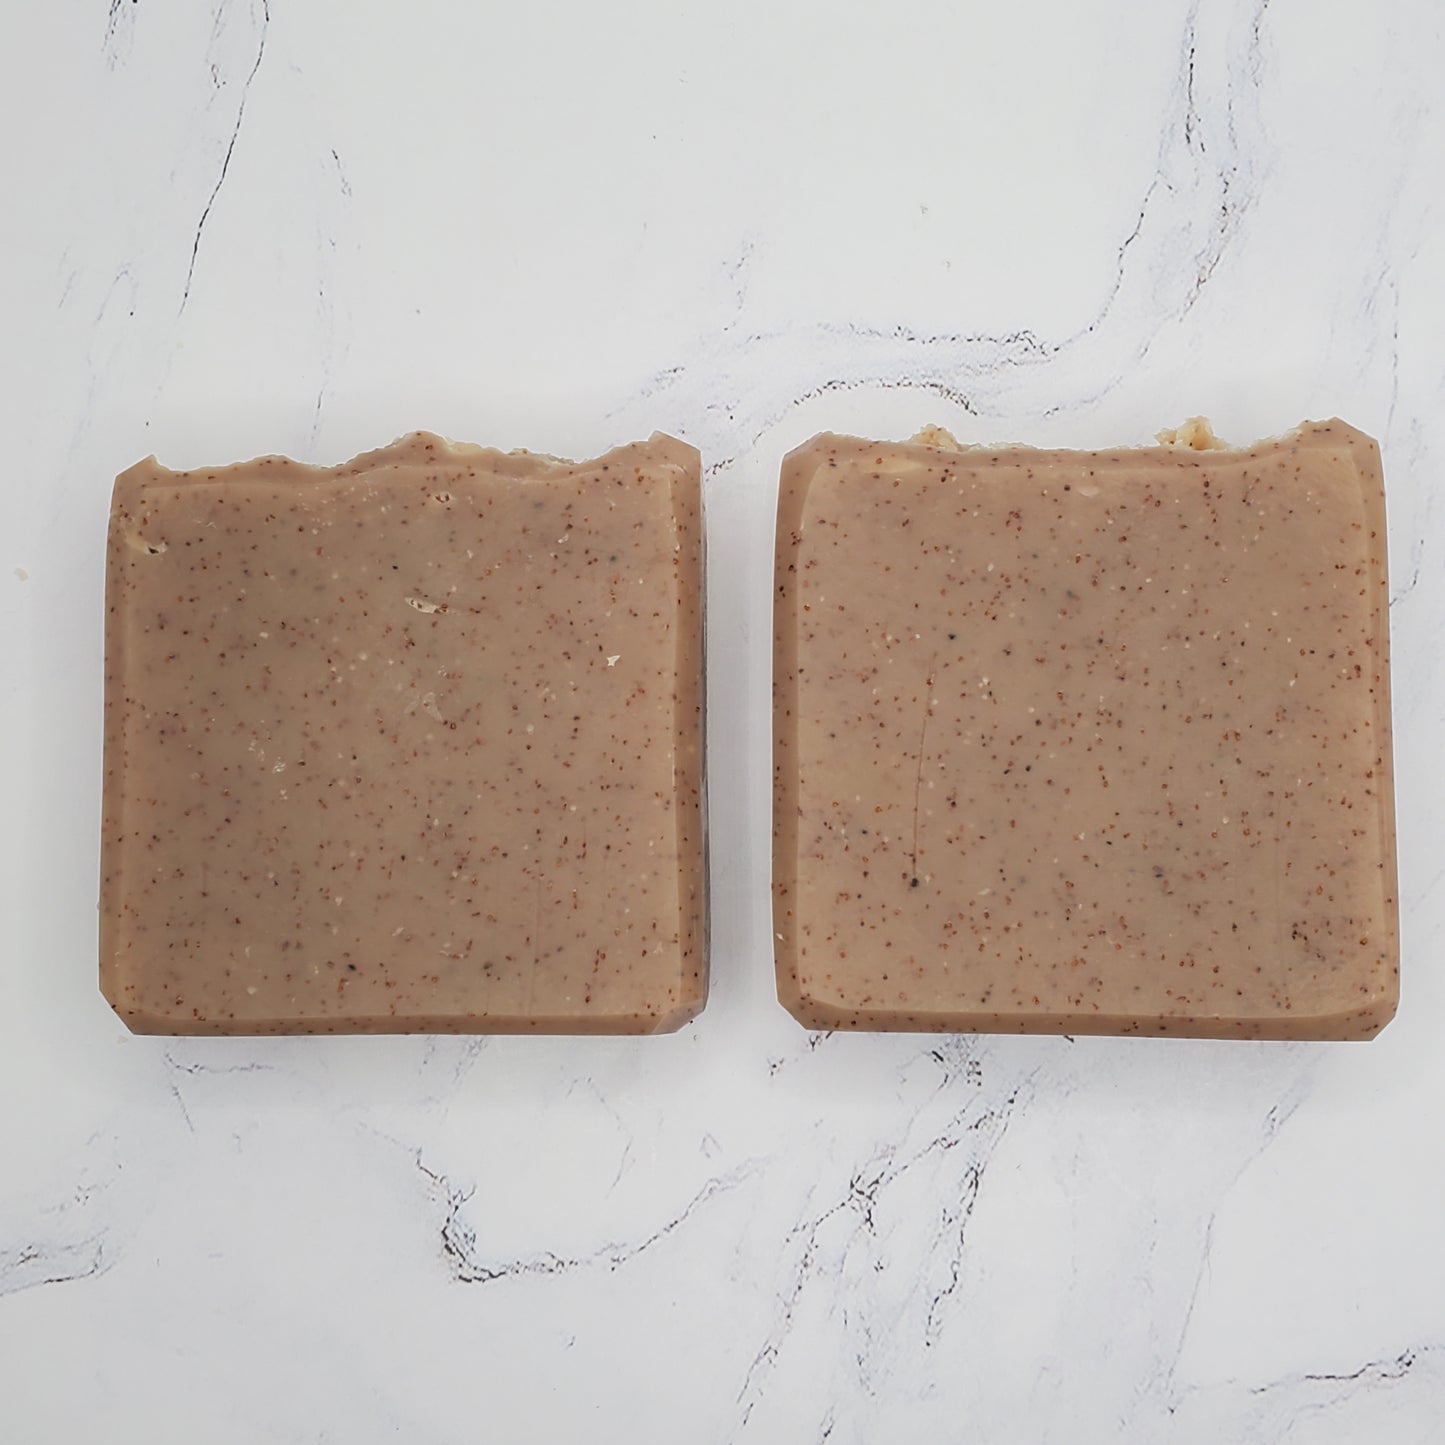 Beer & Walnut Bar Soap with Cedarwood and Clove Essential Oils